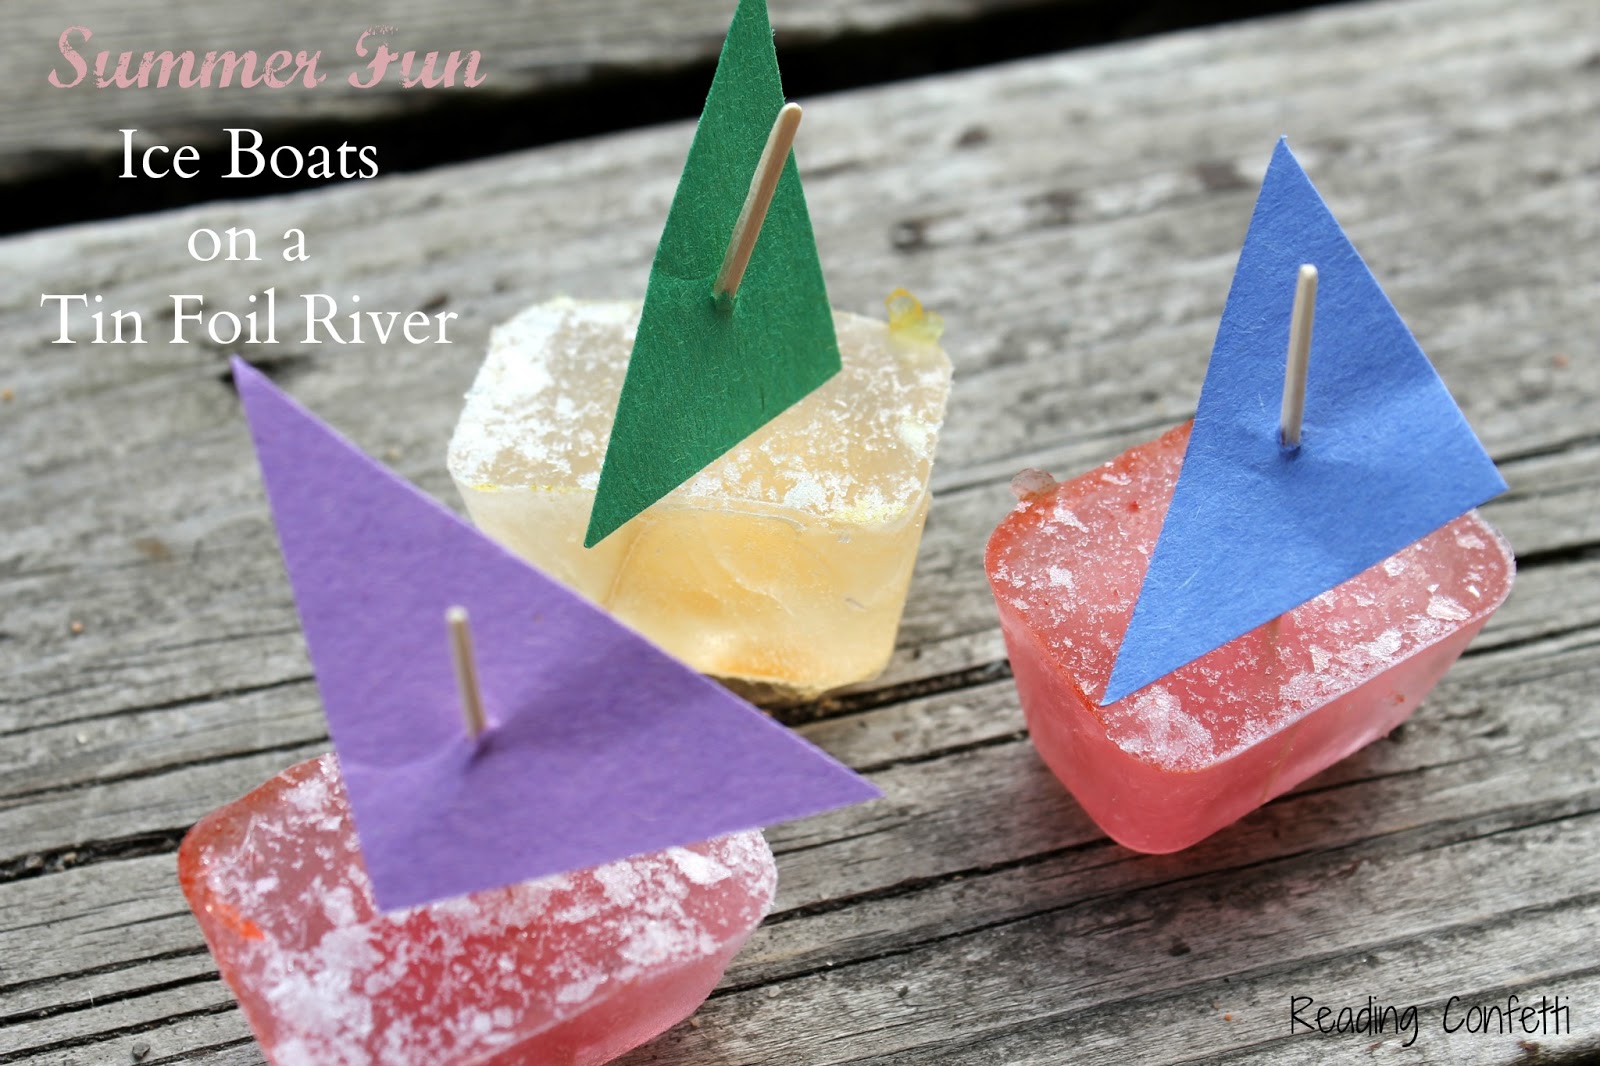  fun: Make mini ice boats and float them on a homemade river river